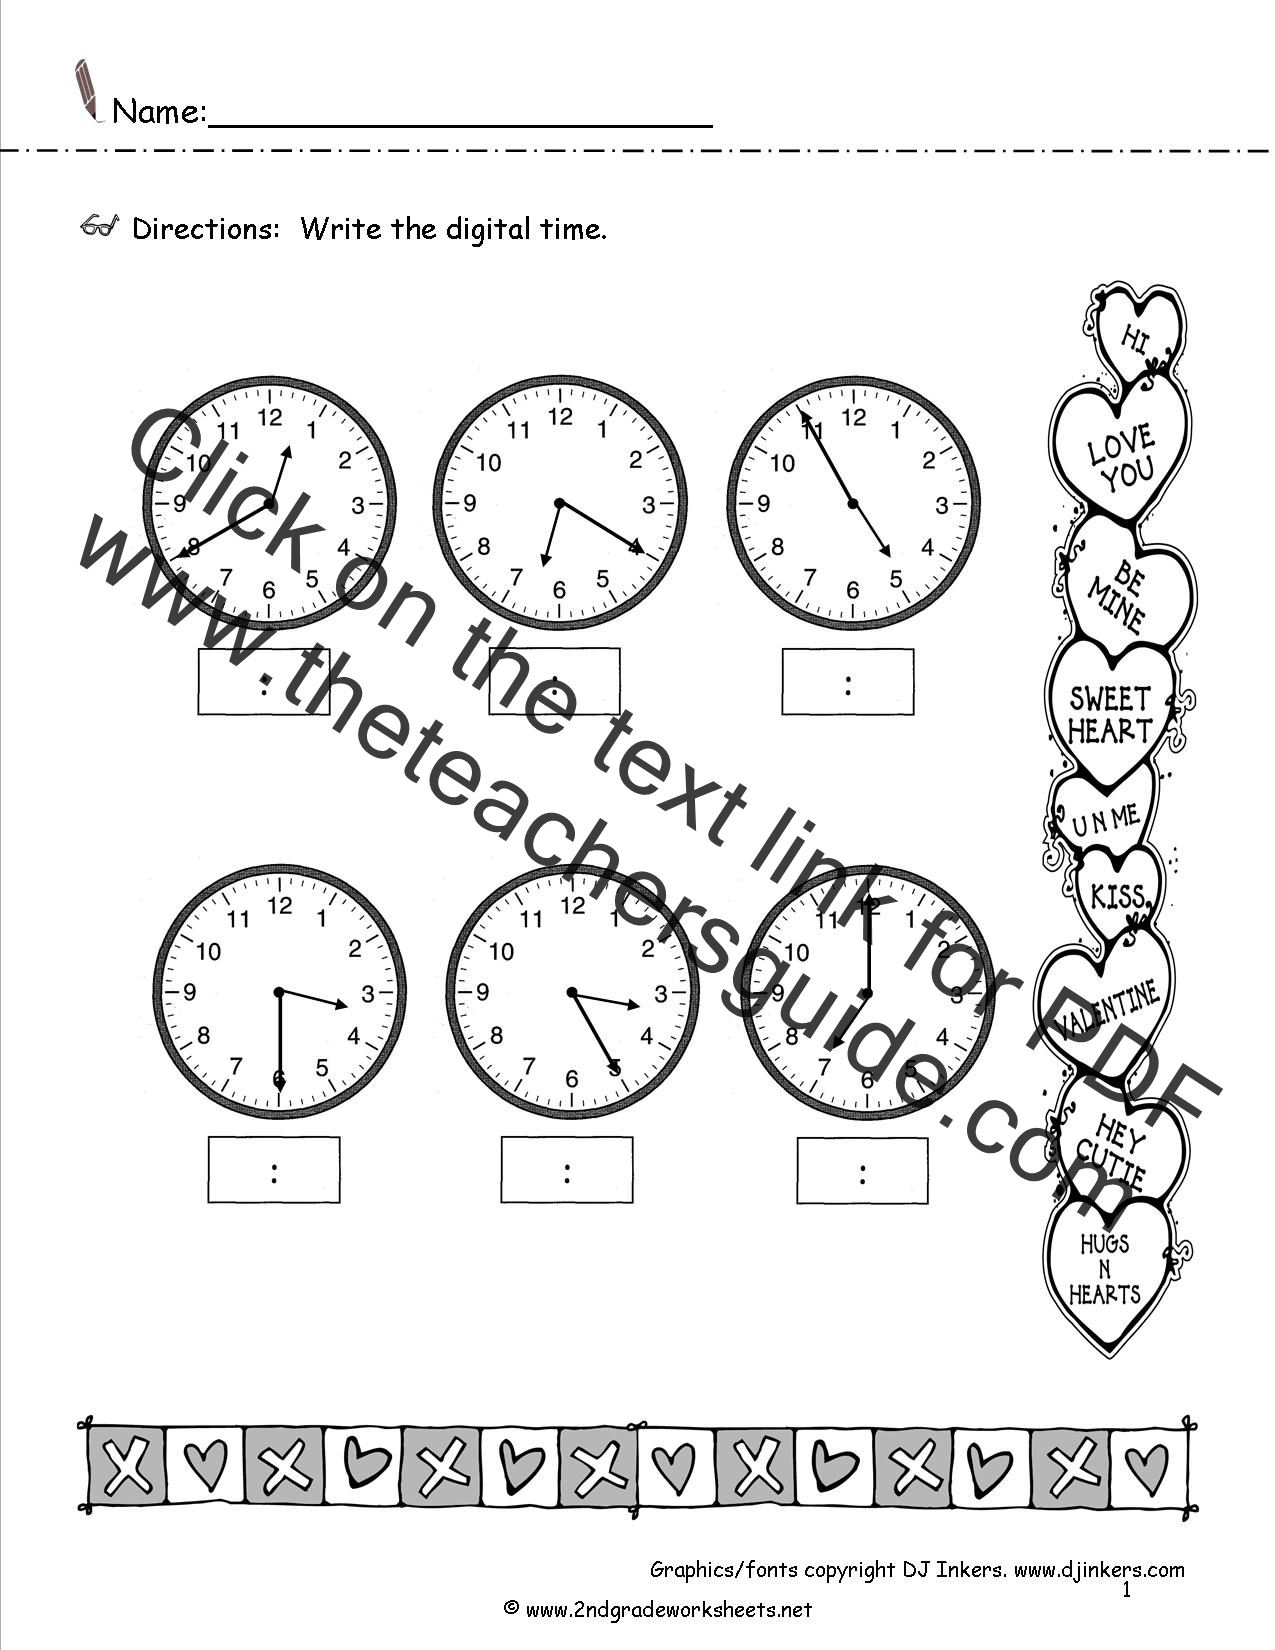 February Lesson Plans, Printouts, Themes, Crafts and Holidays